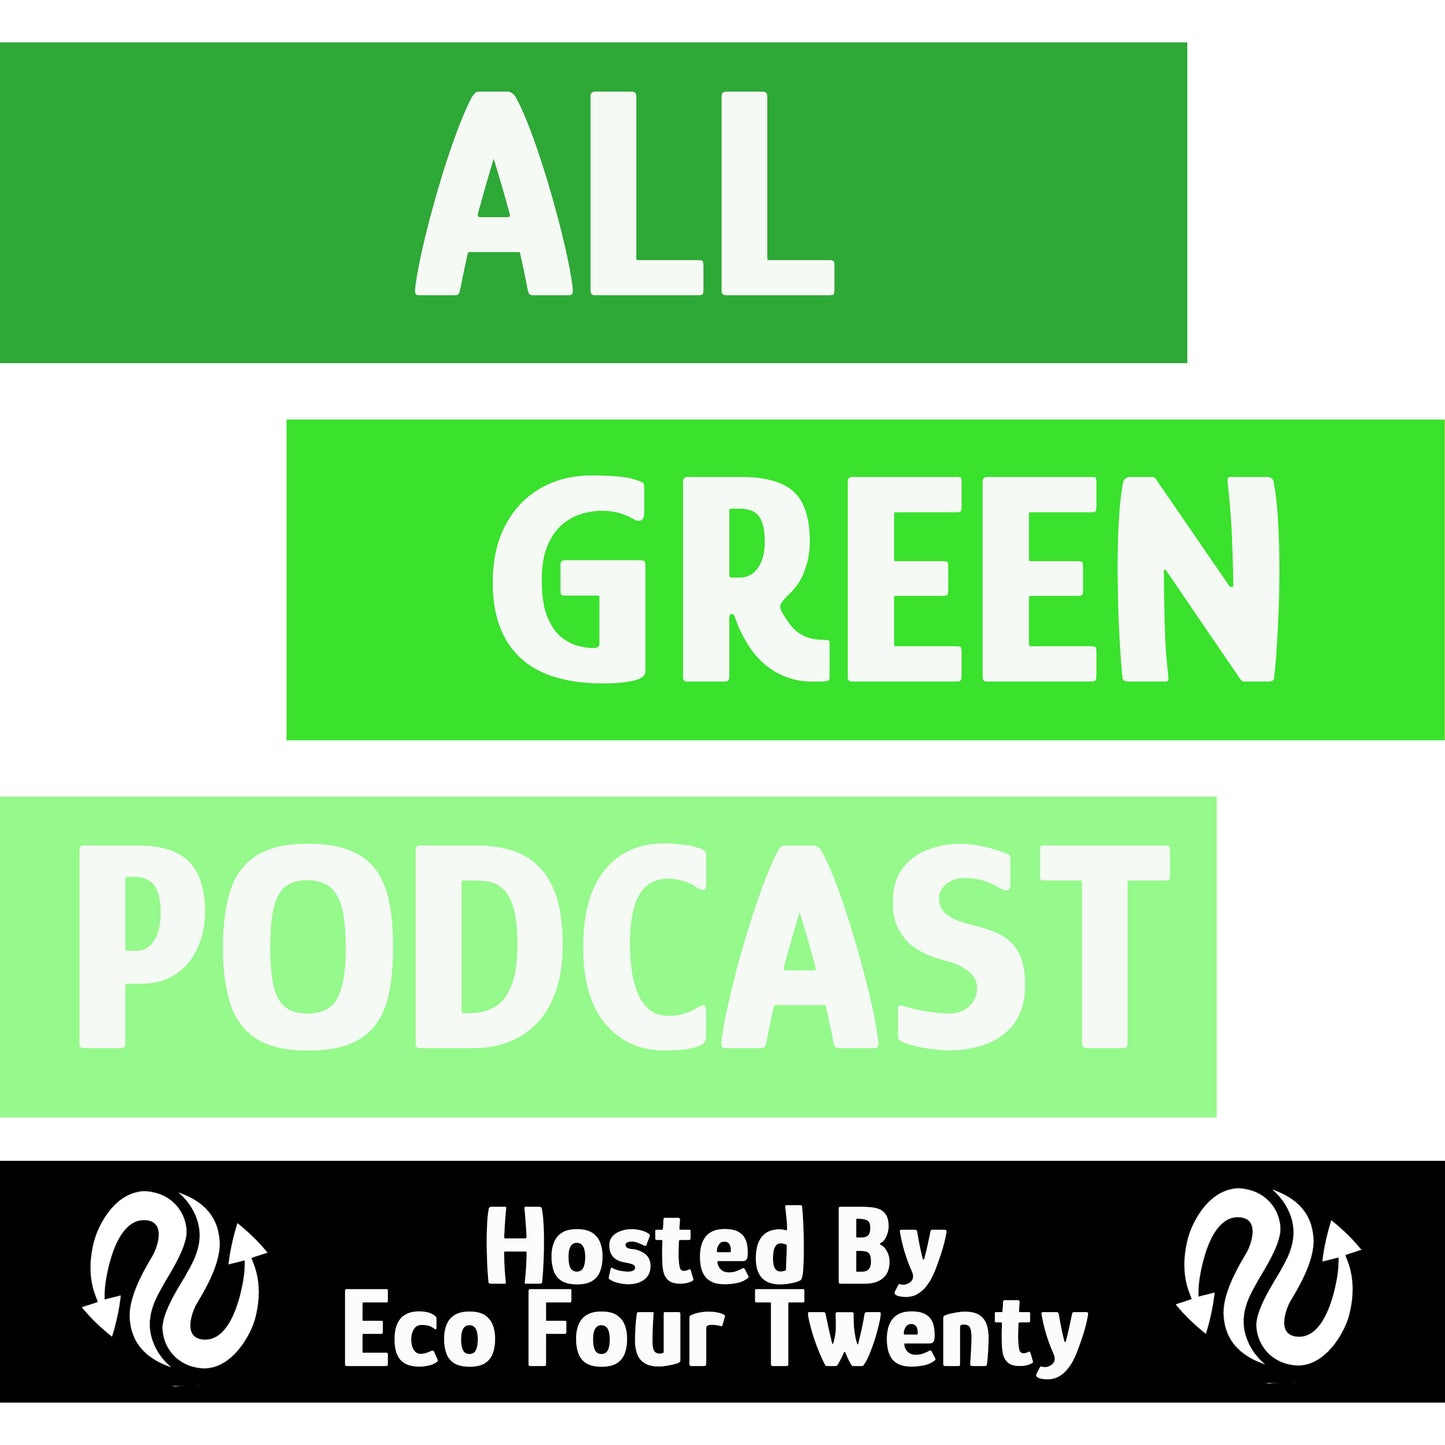 All Green Podcast- Ep. 1: Introduction & Q&A With Eco Four Twenty Founder, Michael